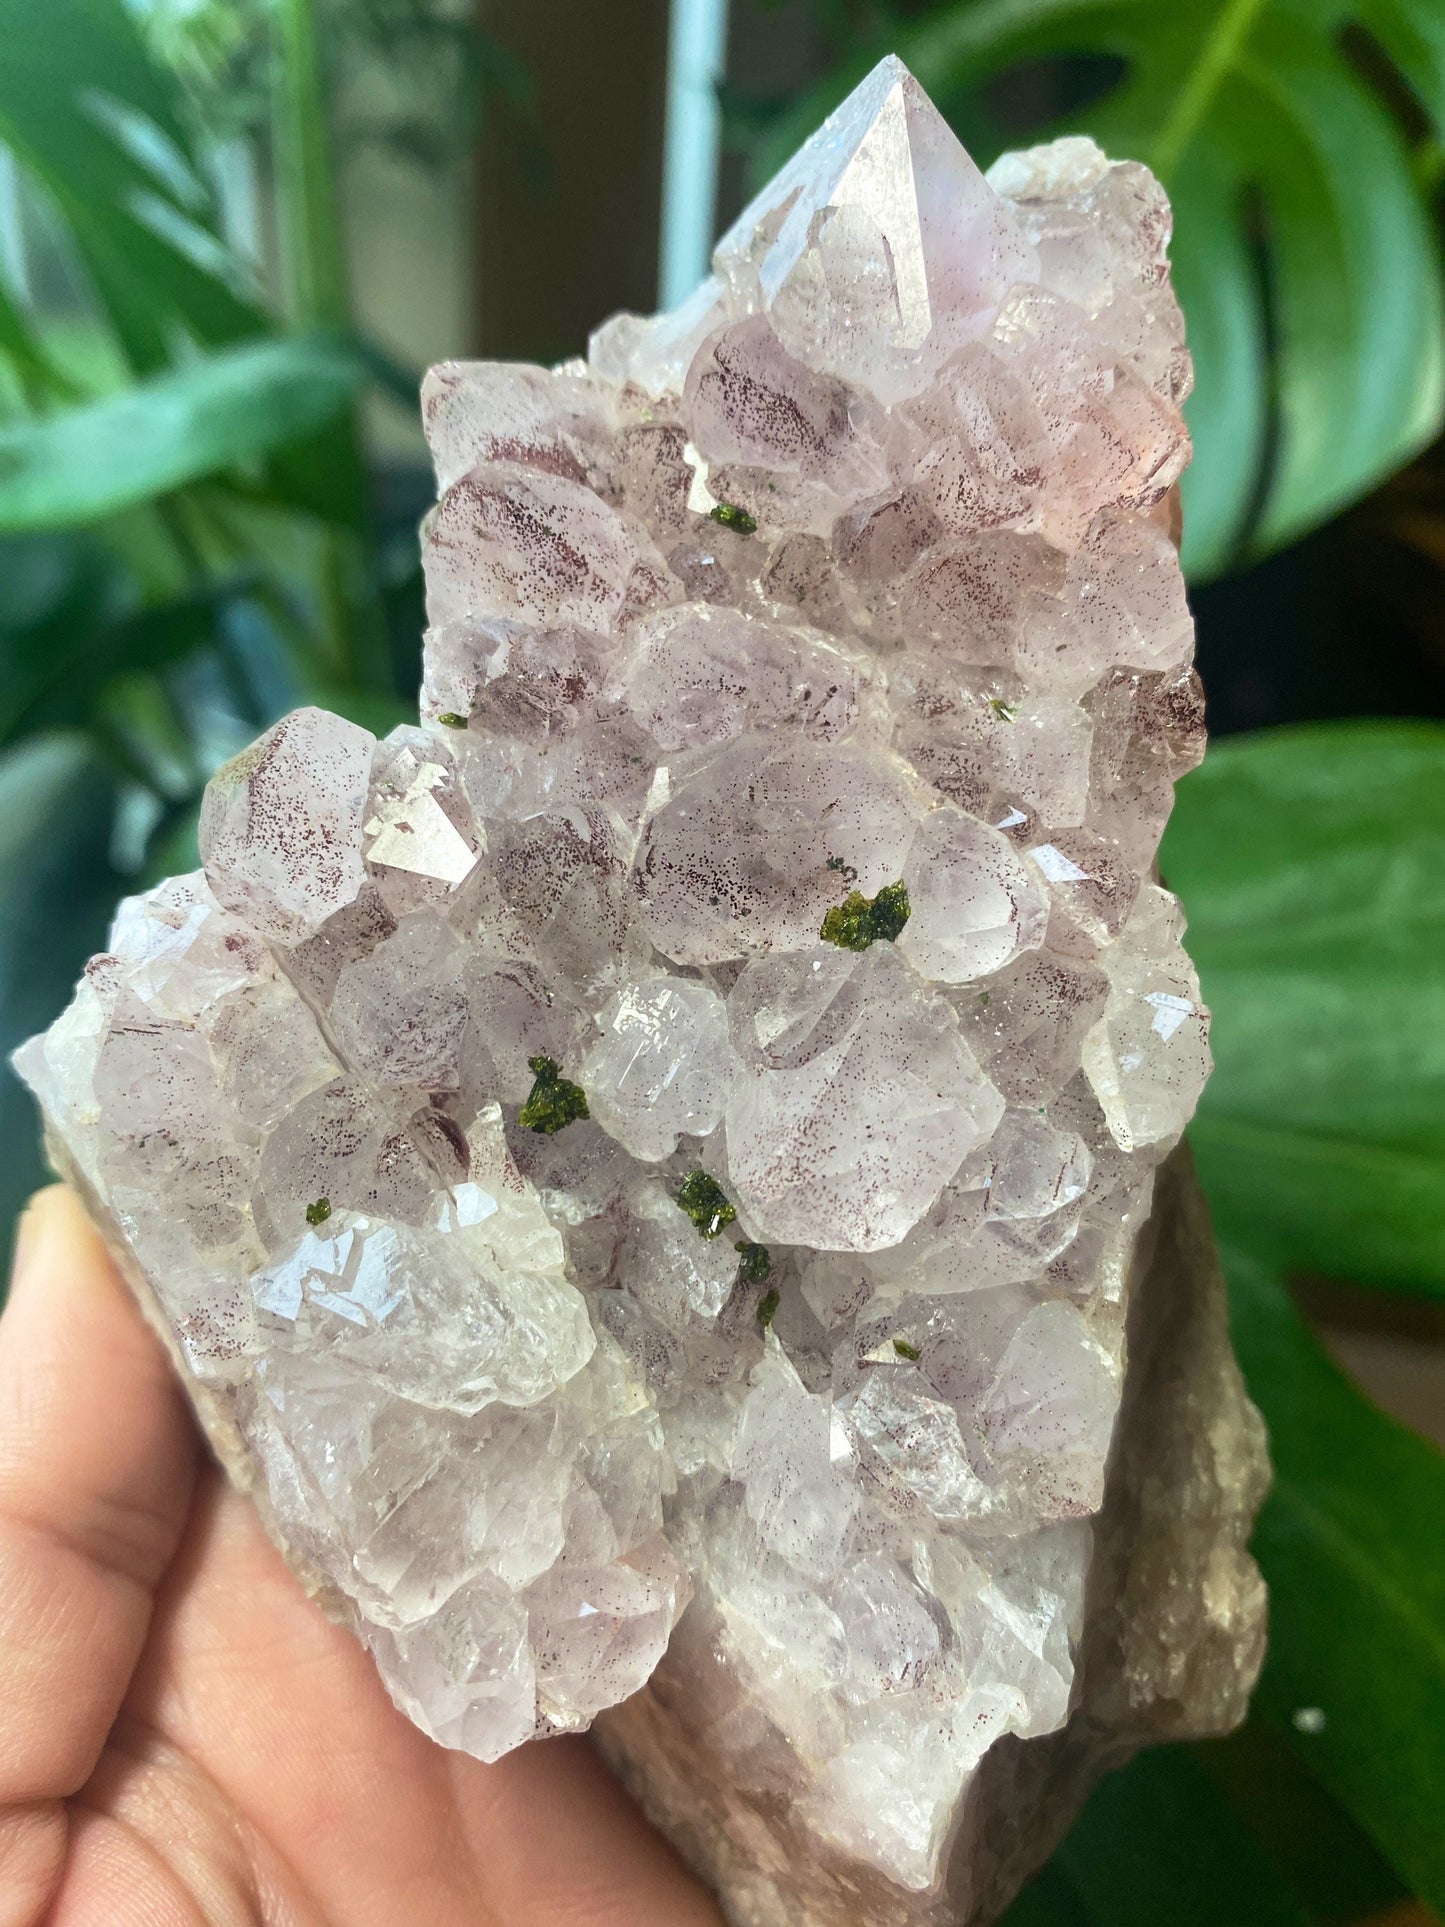 Large Purple Garden Amethyst with Inclusions red hematite Epidote Crystals Raw Mineral Specimen 378g 14x10cm Hubei China